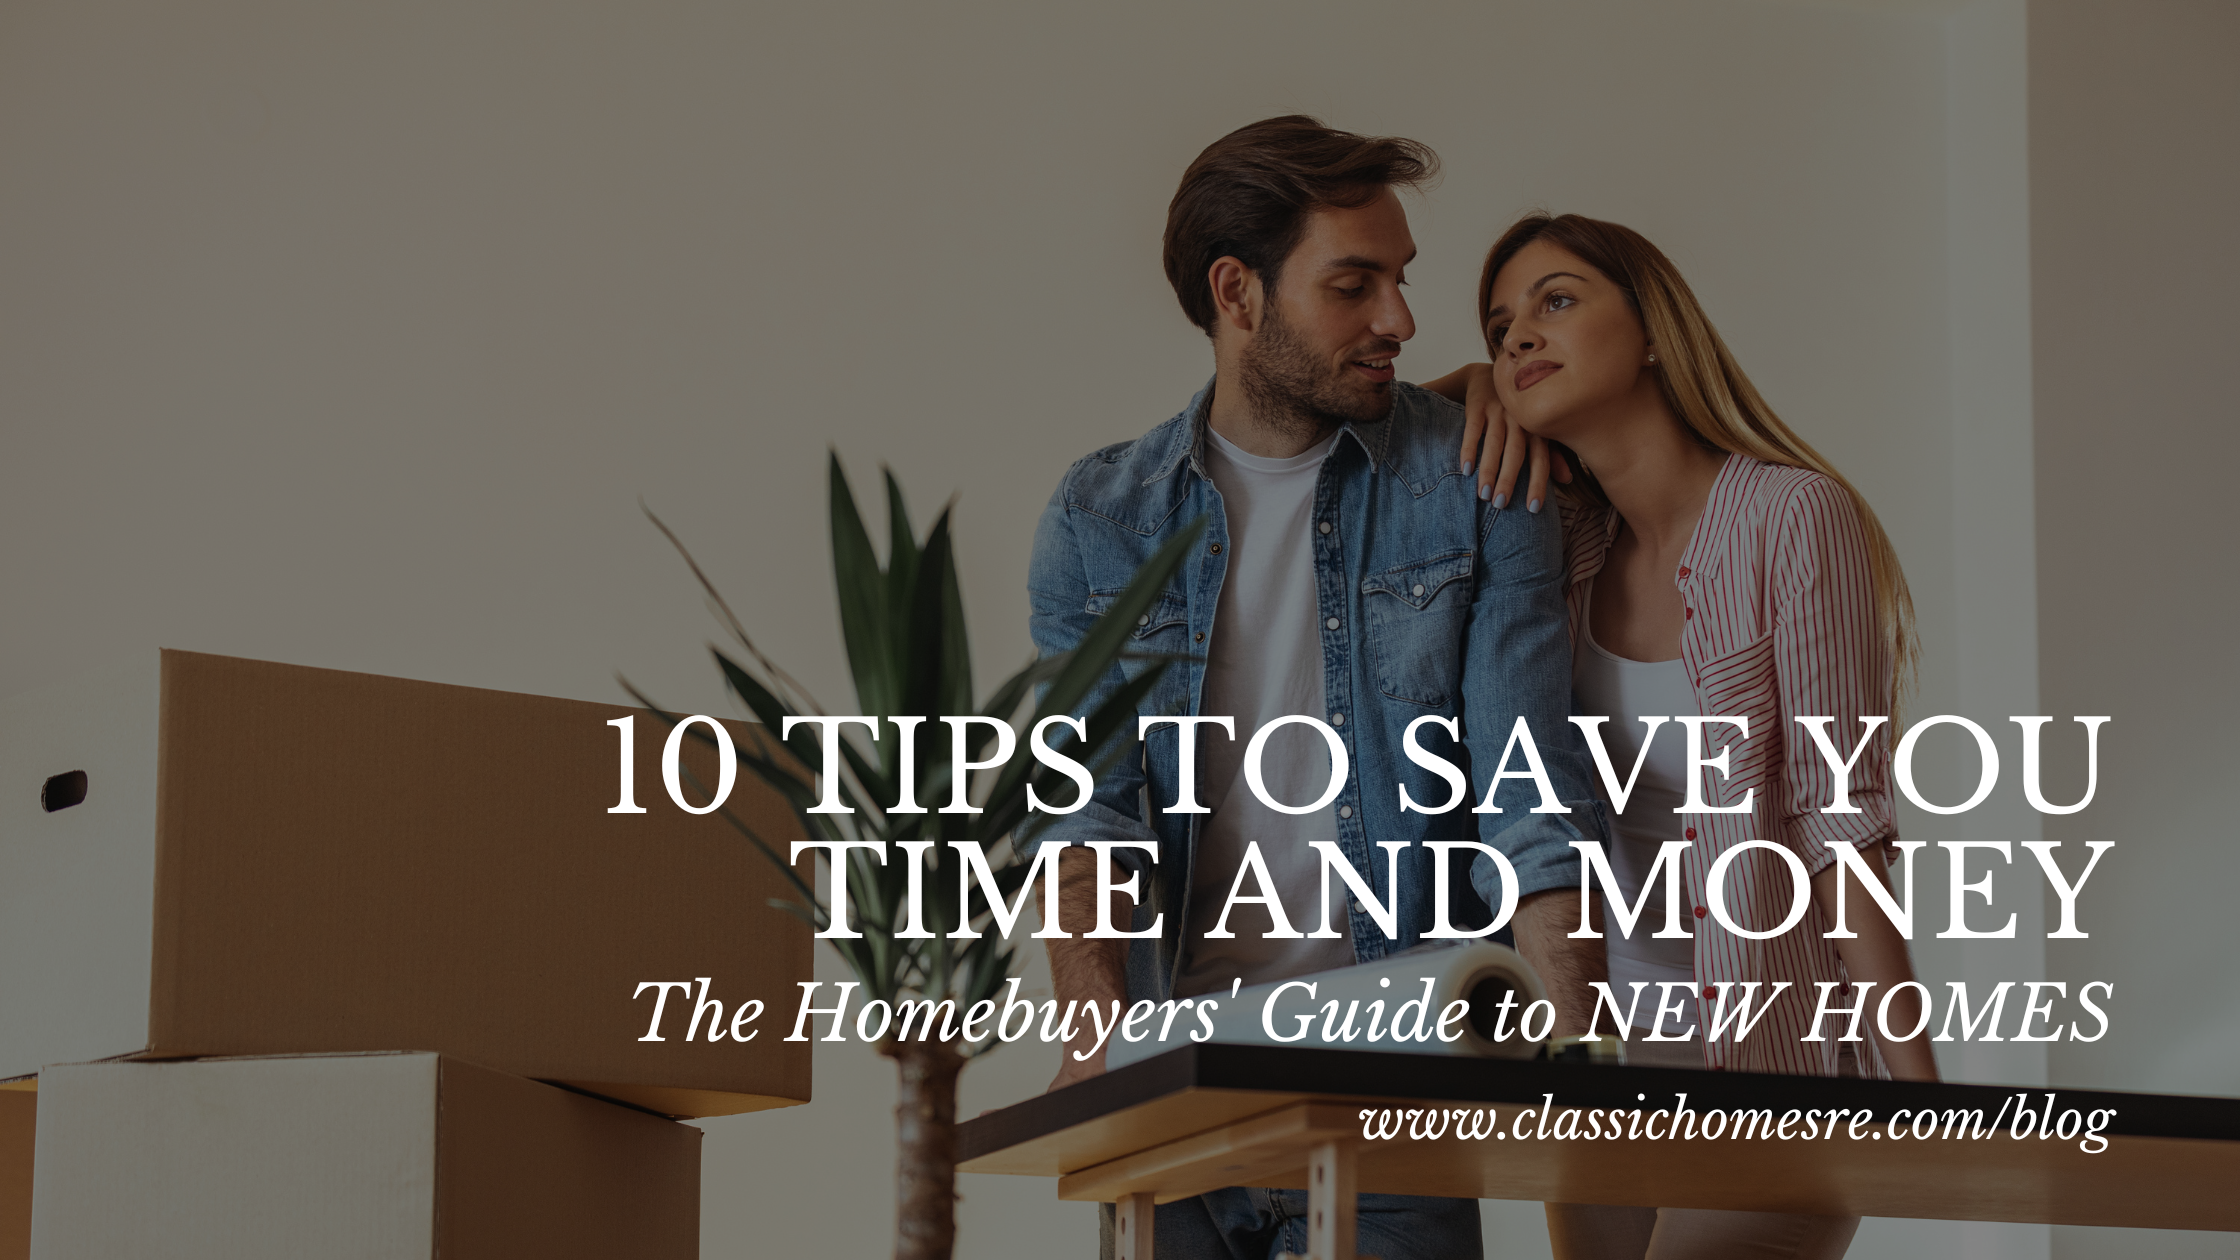 10 Tips to Save You Time and Money: The Homebuyers' Guide to NEW HOMES